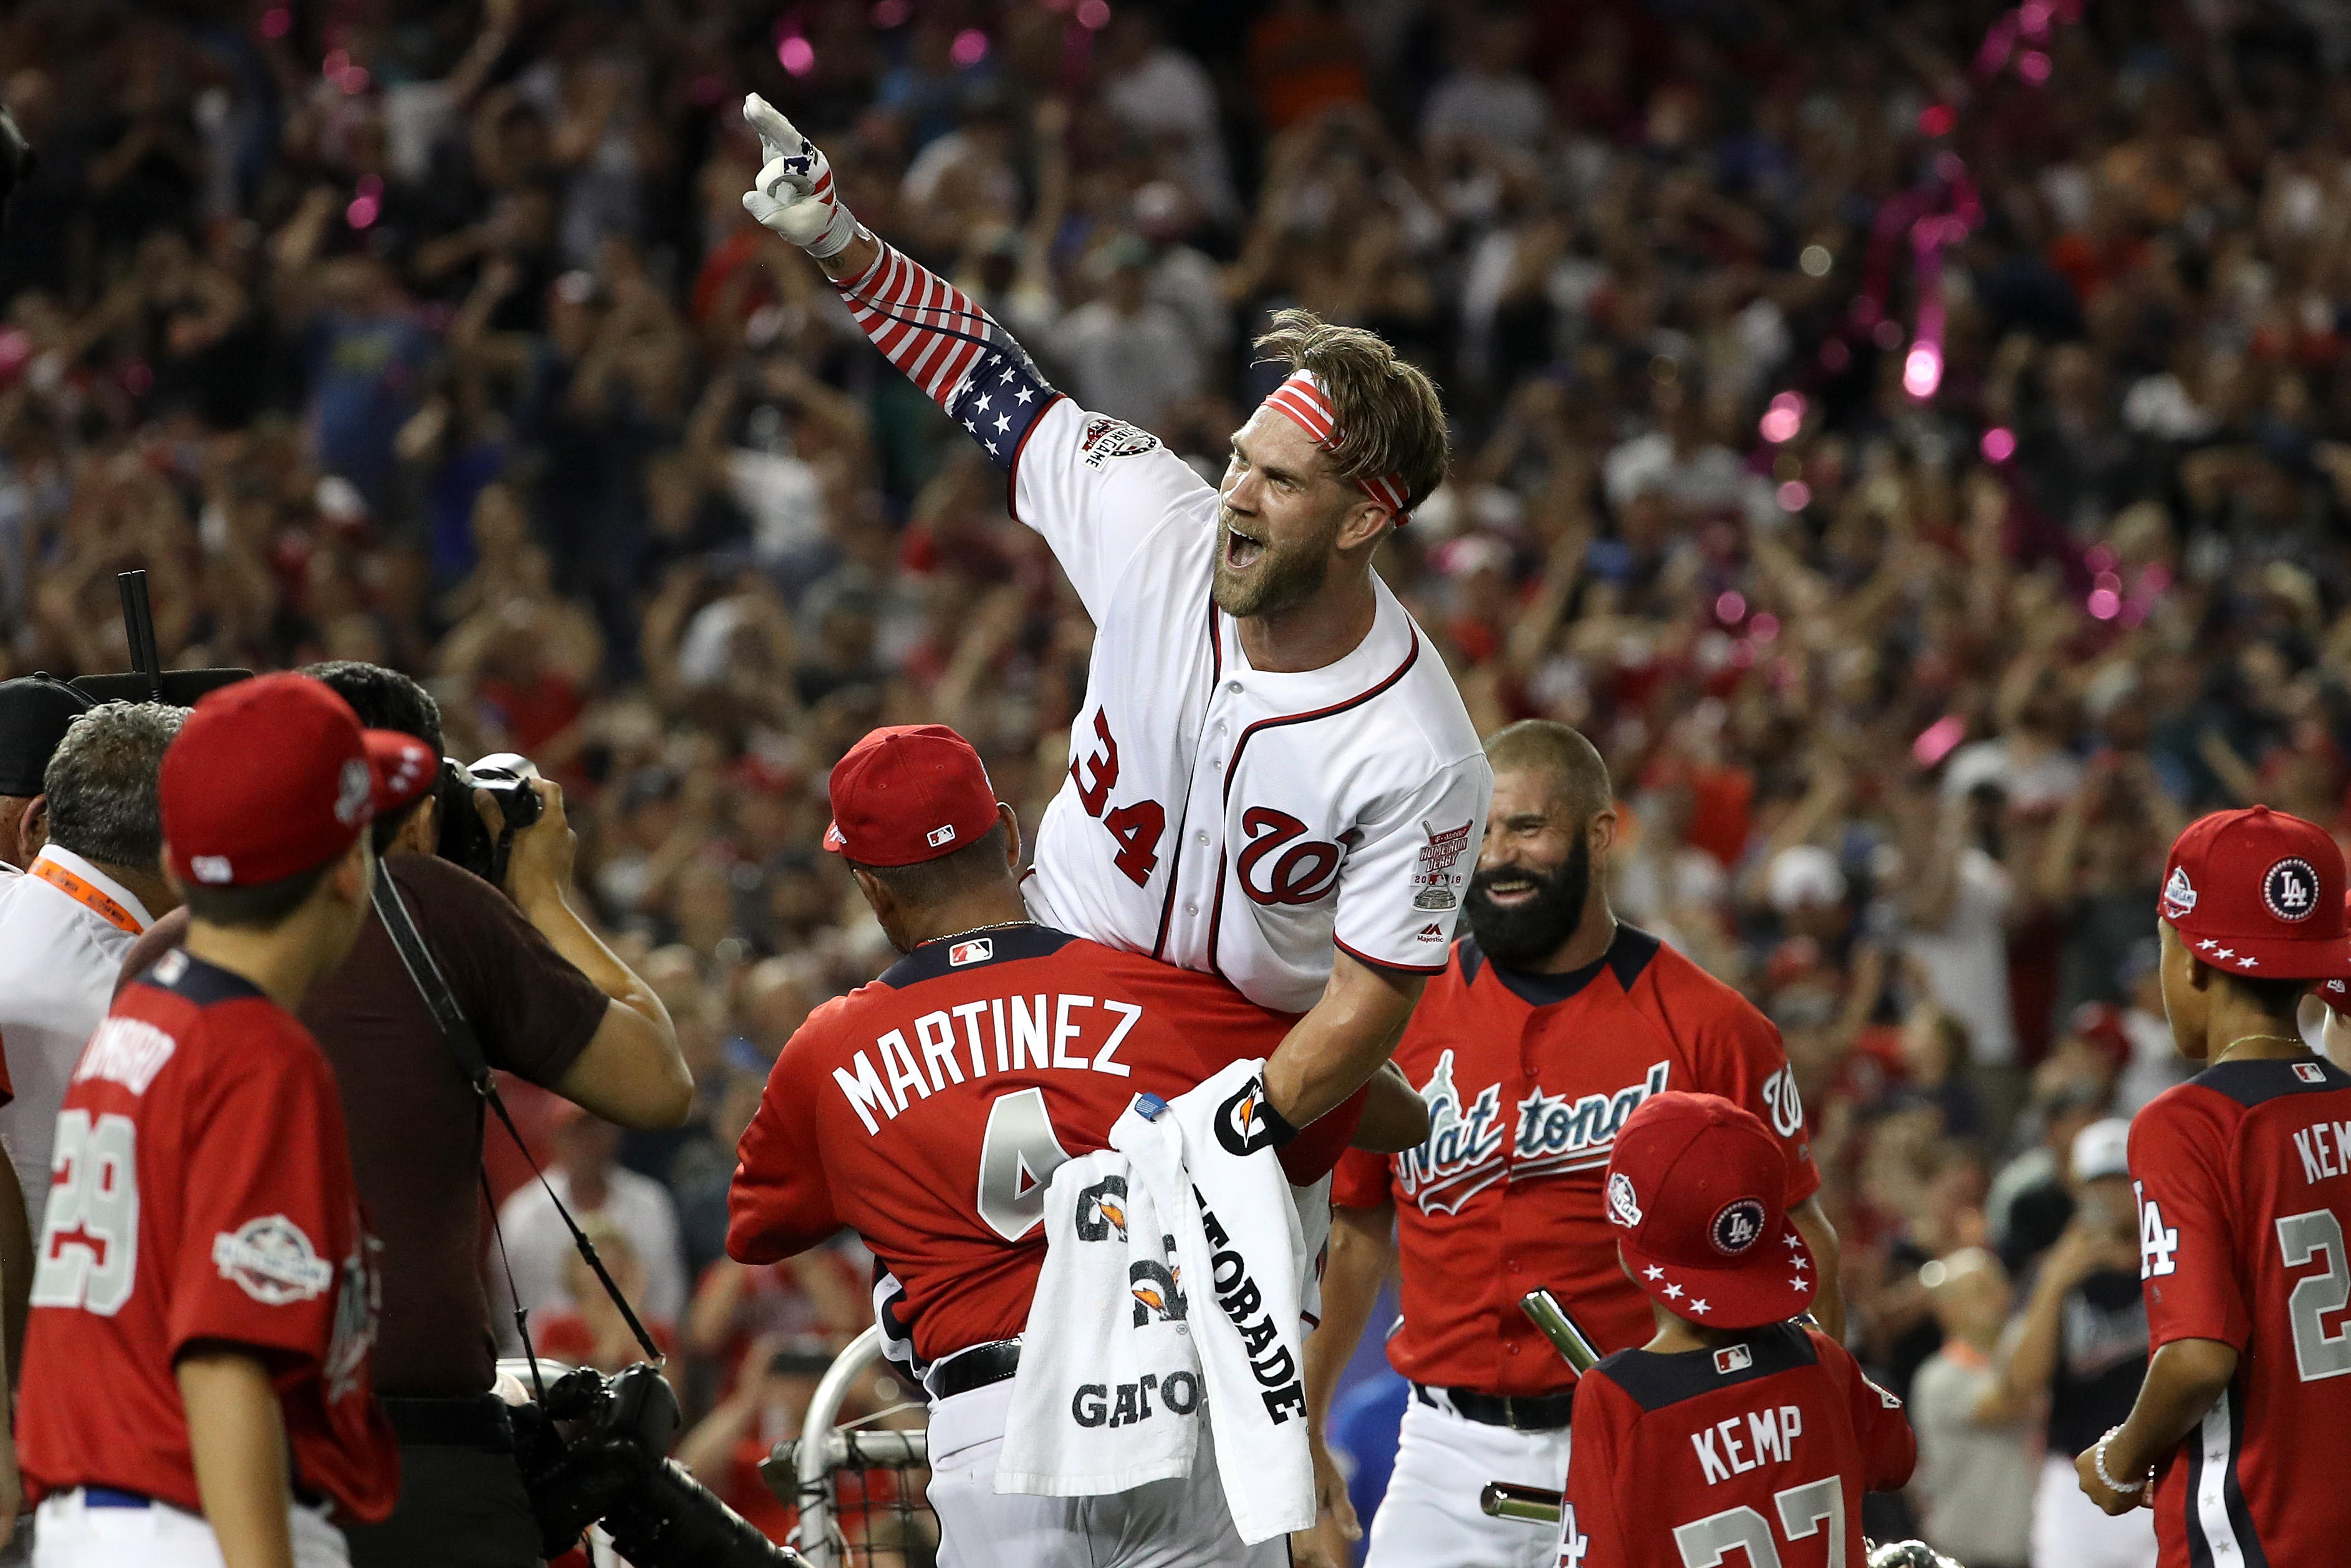 Home Run Derby results today: Bryce Harper of Washington Nationals